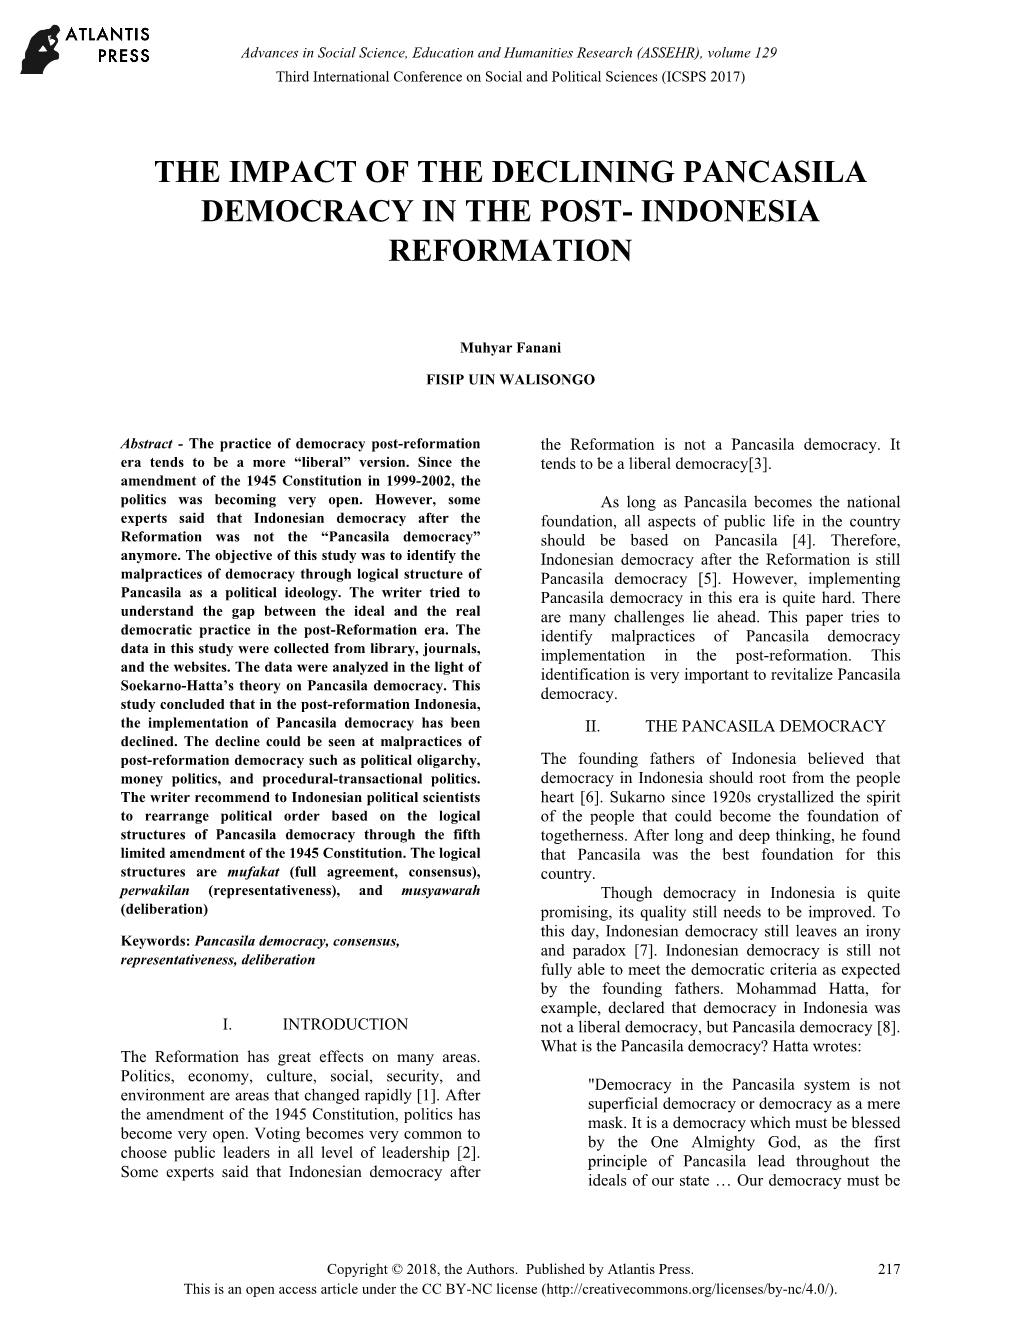 The Impact of the Declining Pancasila Democracy in the Post- Indonesia Reformation